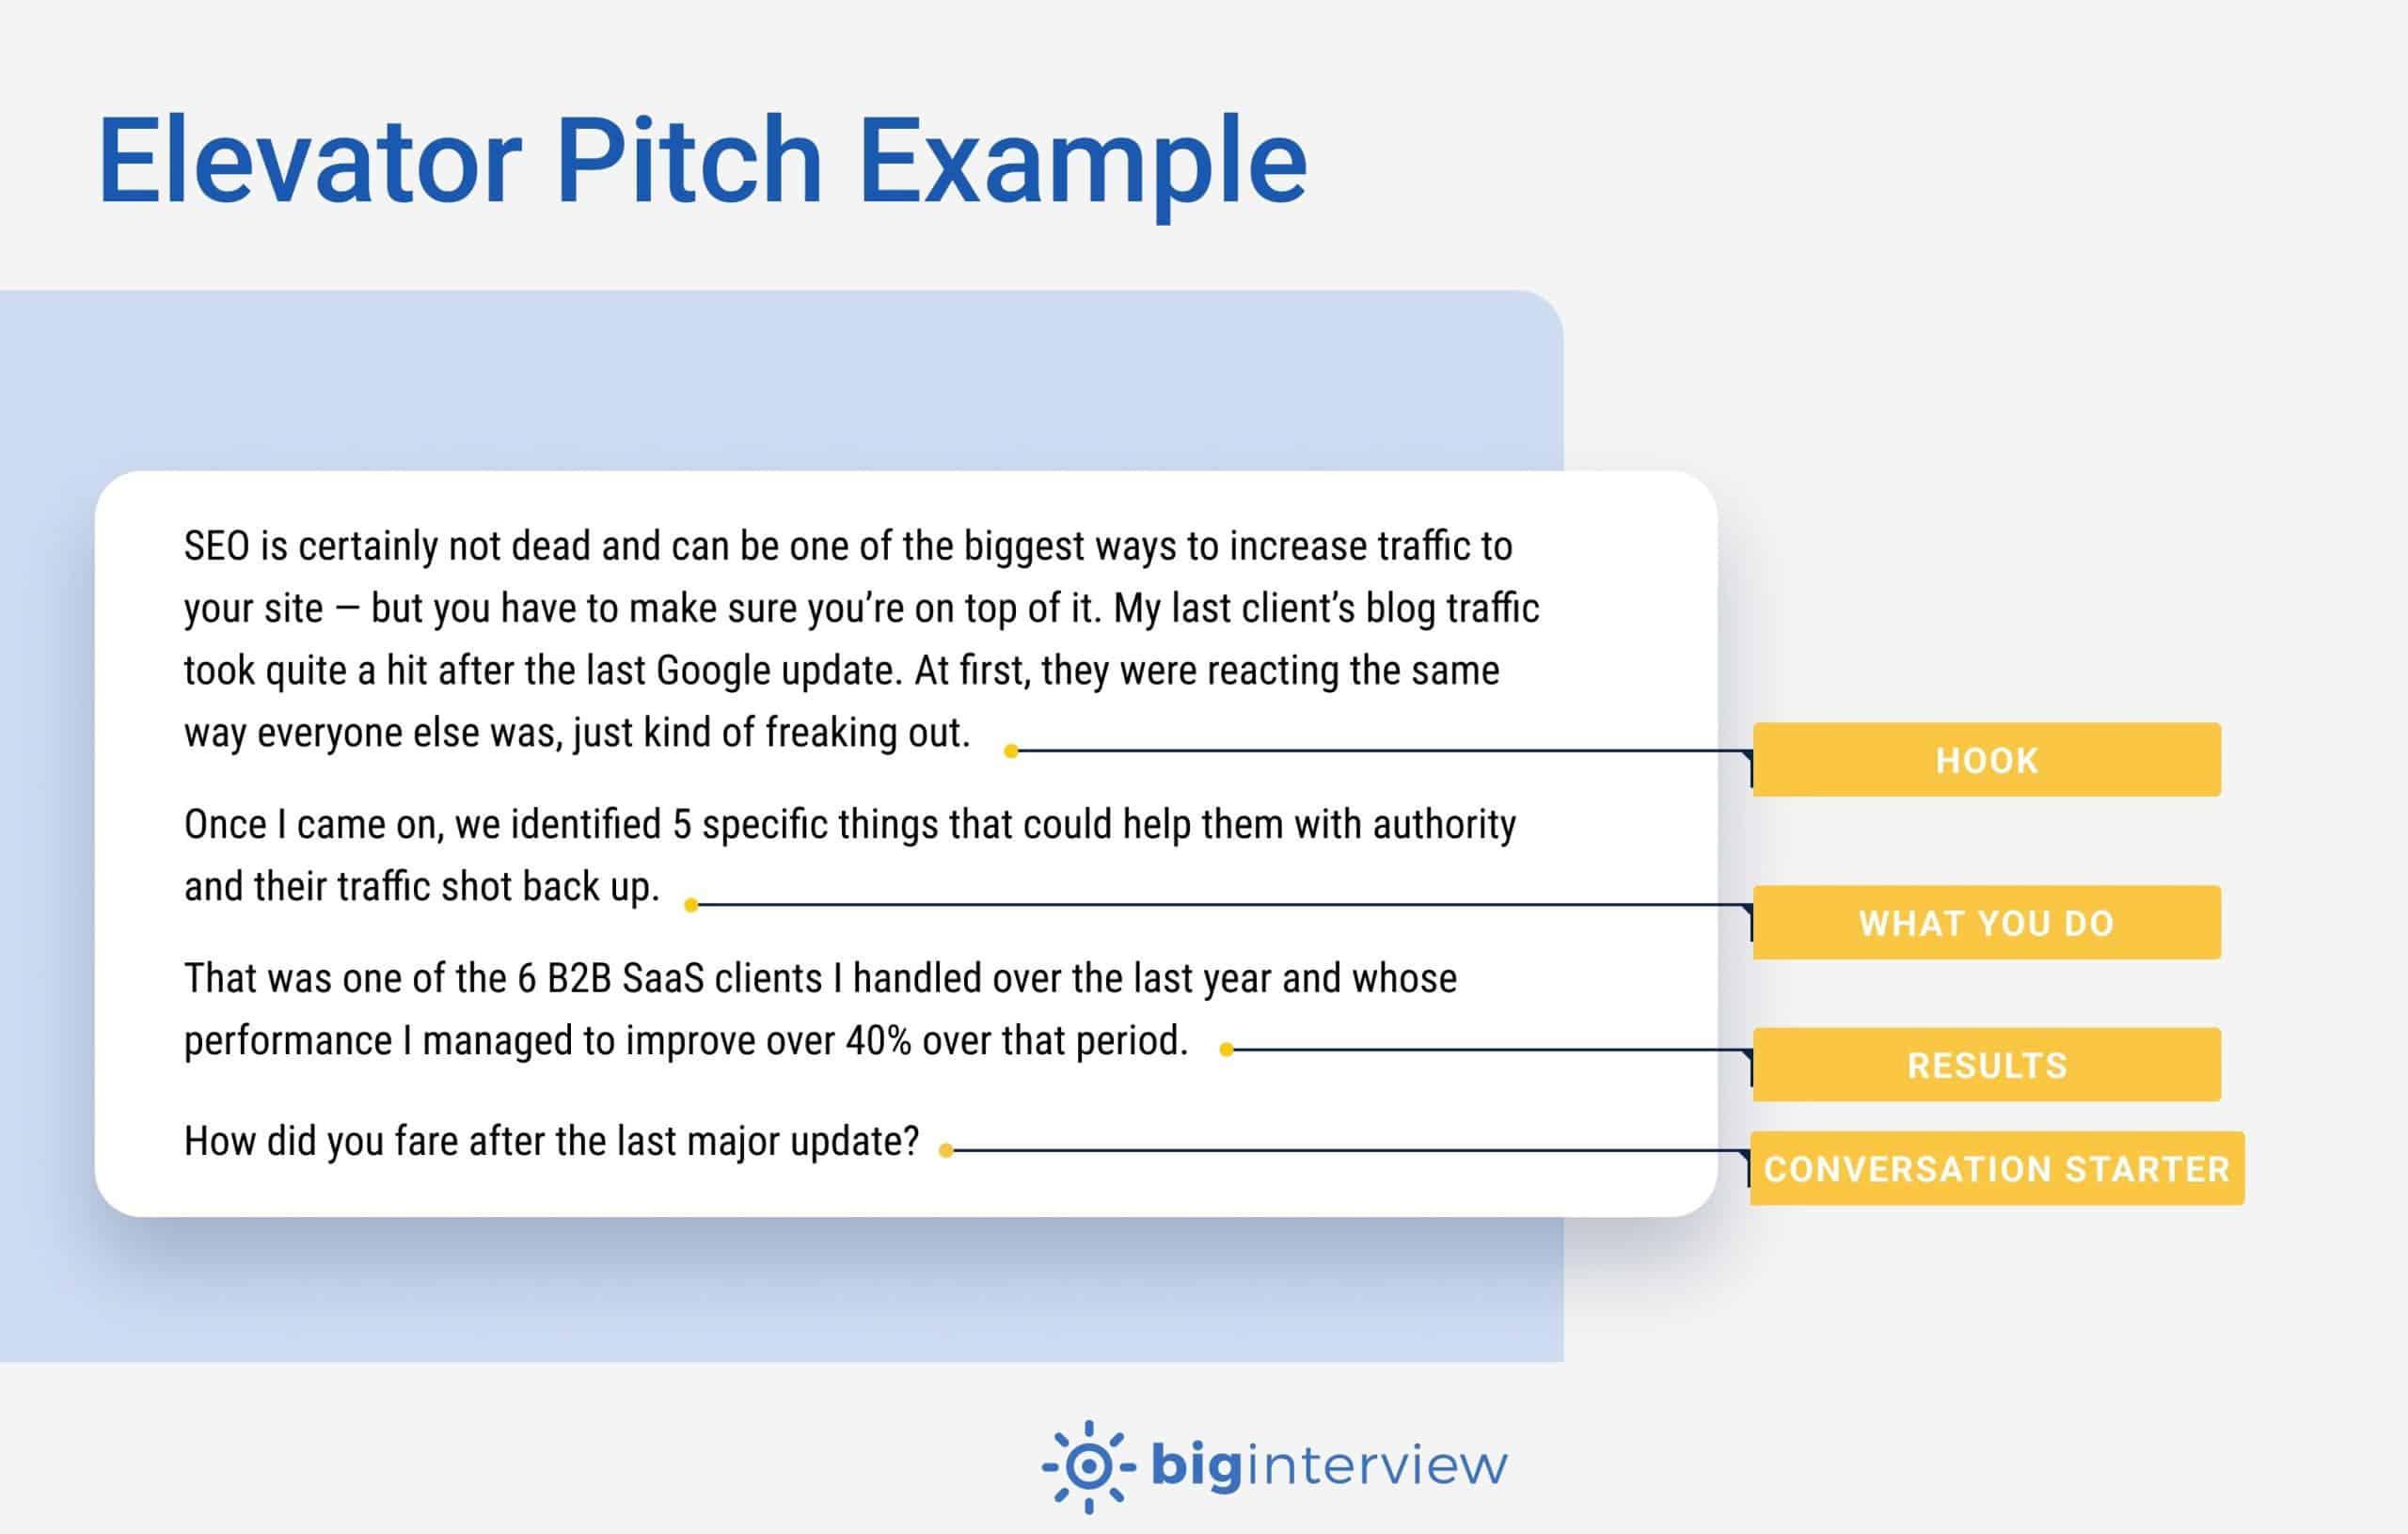 Elevator pitch example